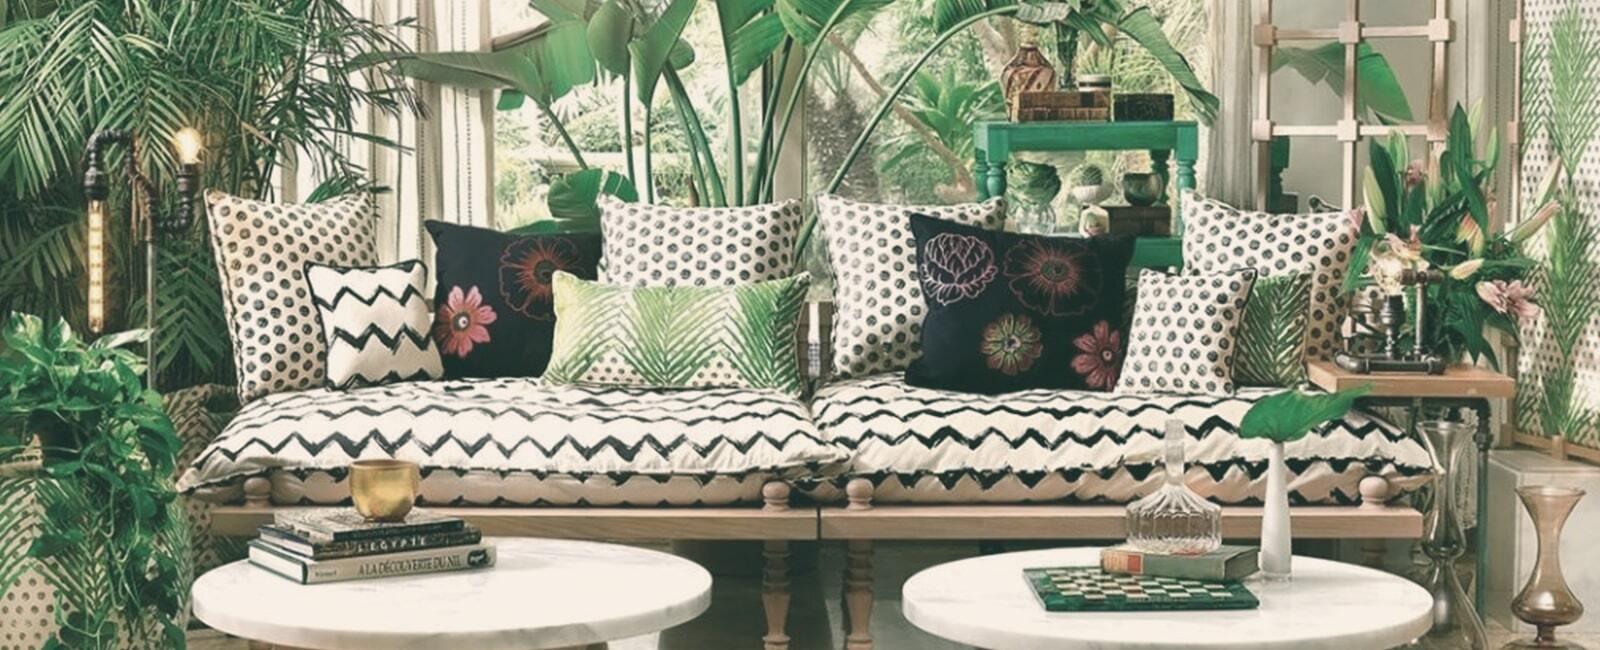 Top 10 Fabric-Made Home Furnishing Ideas to Perk up your Living Space